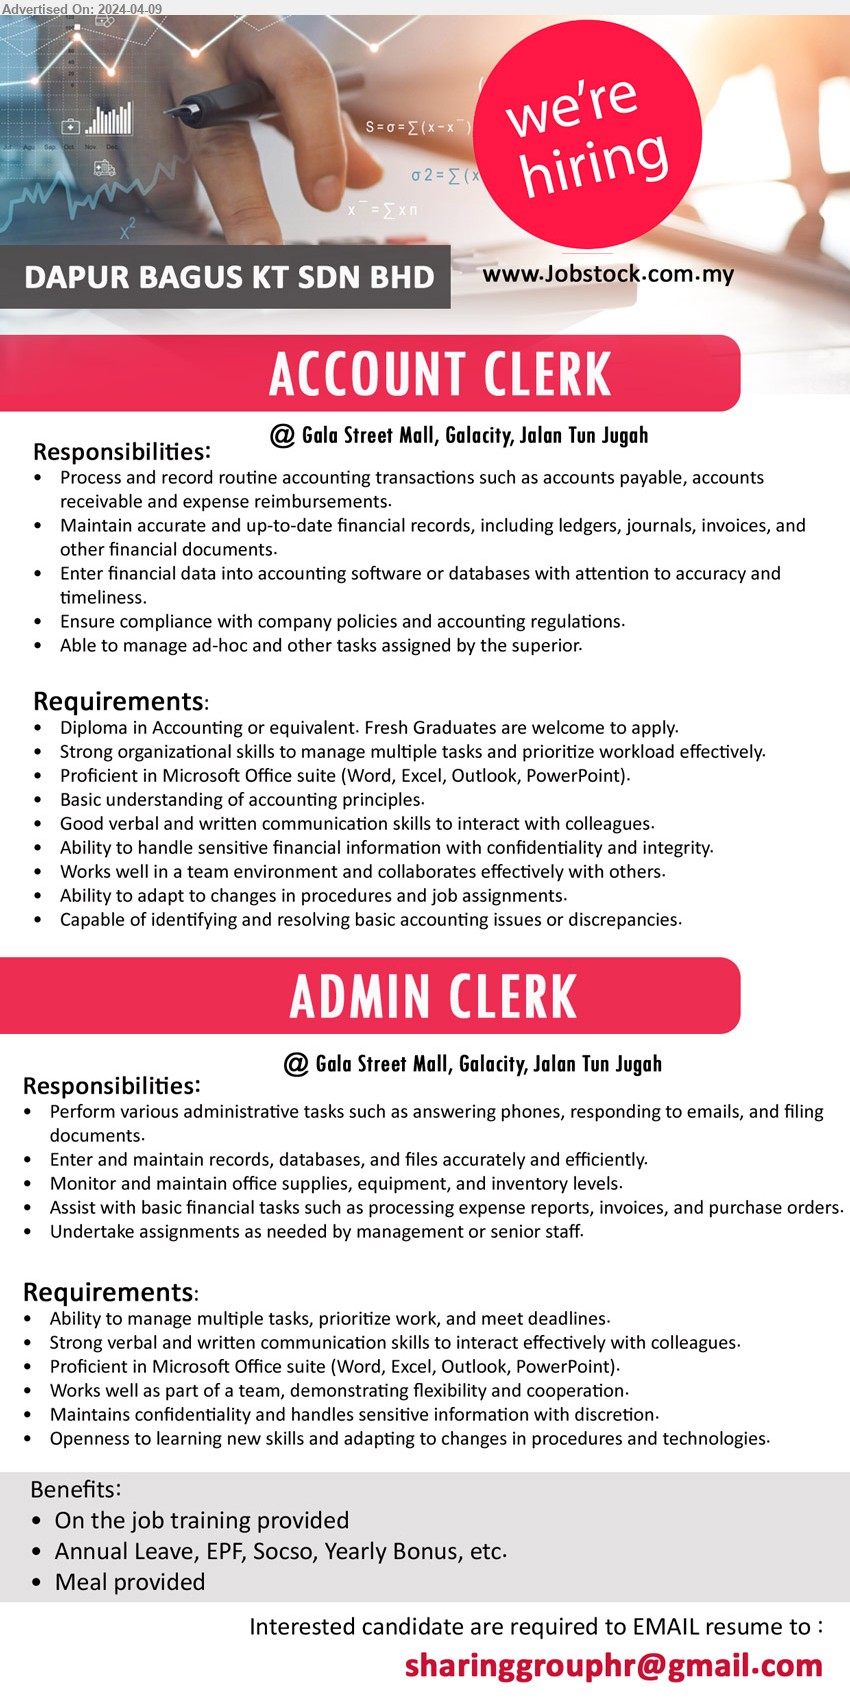 DAPUR BAGUS KT SDN BHD - 1. ACCOUNT CLERK (Kuching), Diploma in Accounting or equivalent. Fresh Graduates are welcome to apply, Basic understanding of accounting principles.,...
2. ADMIN CLERK (Kuching), Proficient in Microsoft Office suite (Word, Excel, Outlook, PowerPoint).,...
Email resume to ...